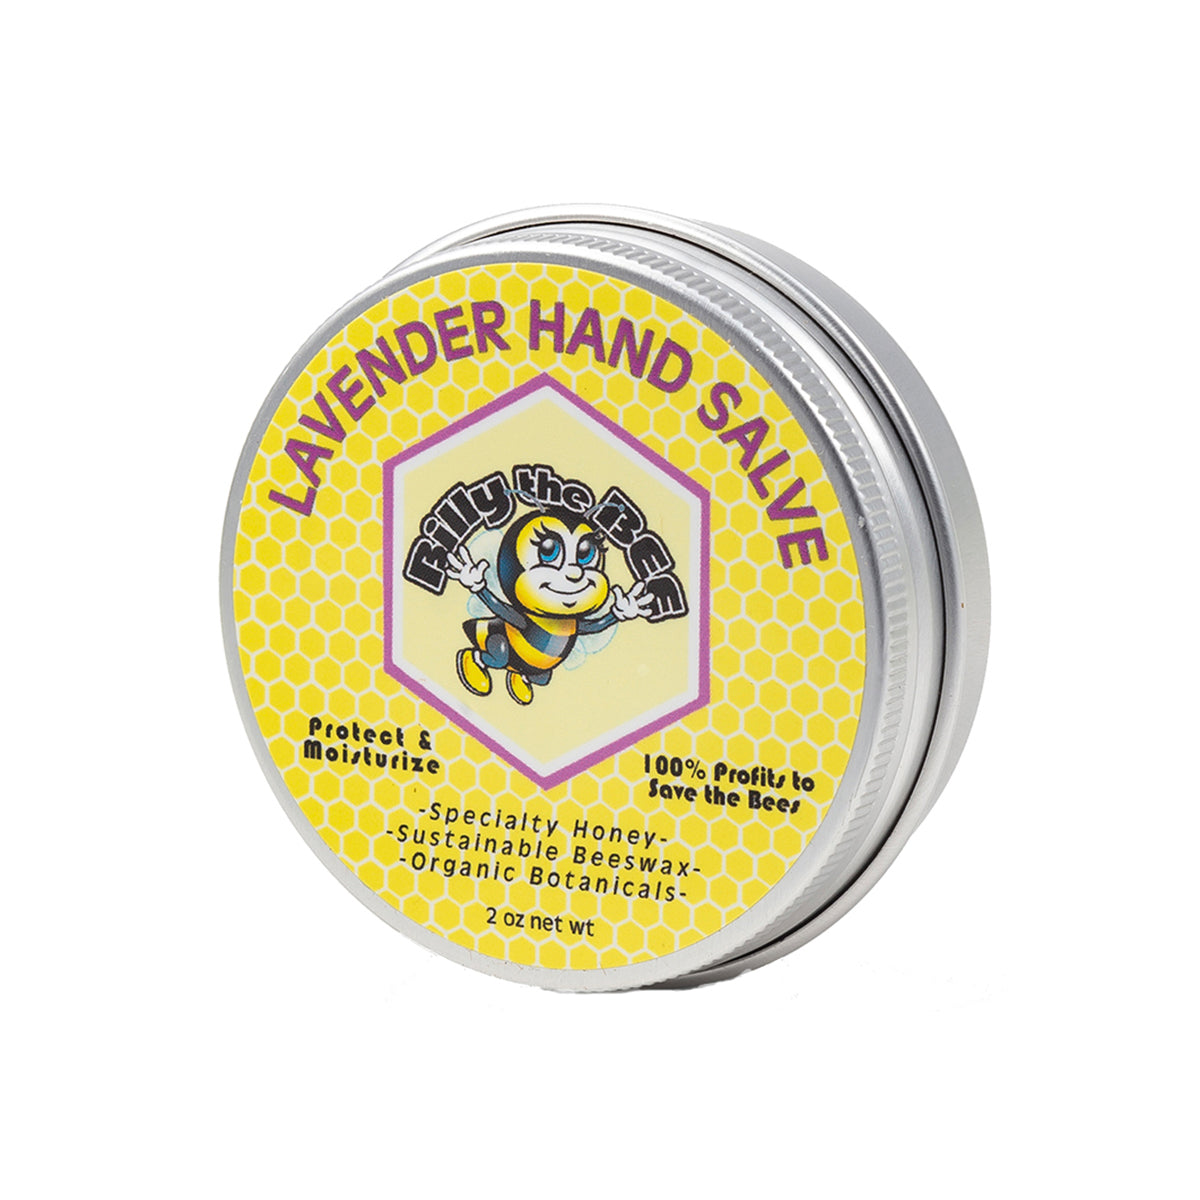 Lavender Hand Salve from Billy the Bee brand